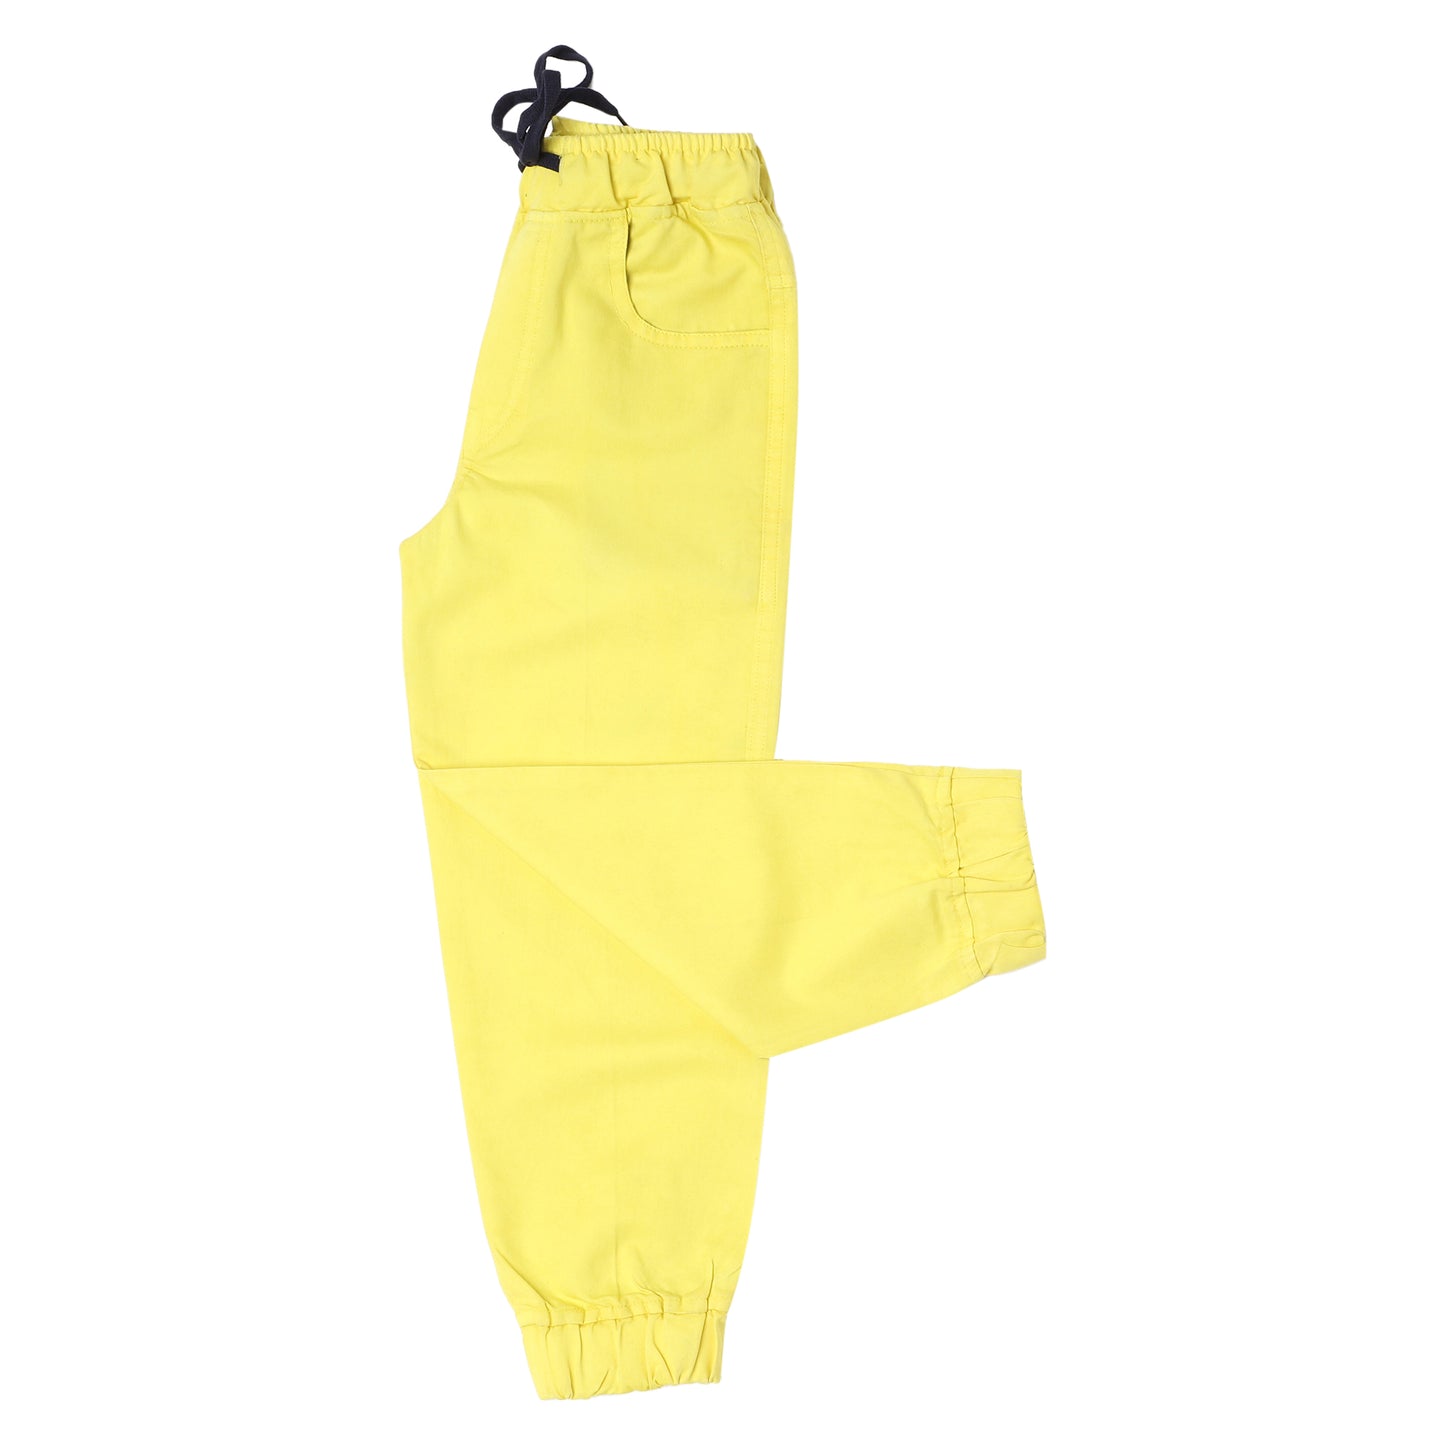 Jogger for Girls - Yellow